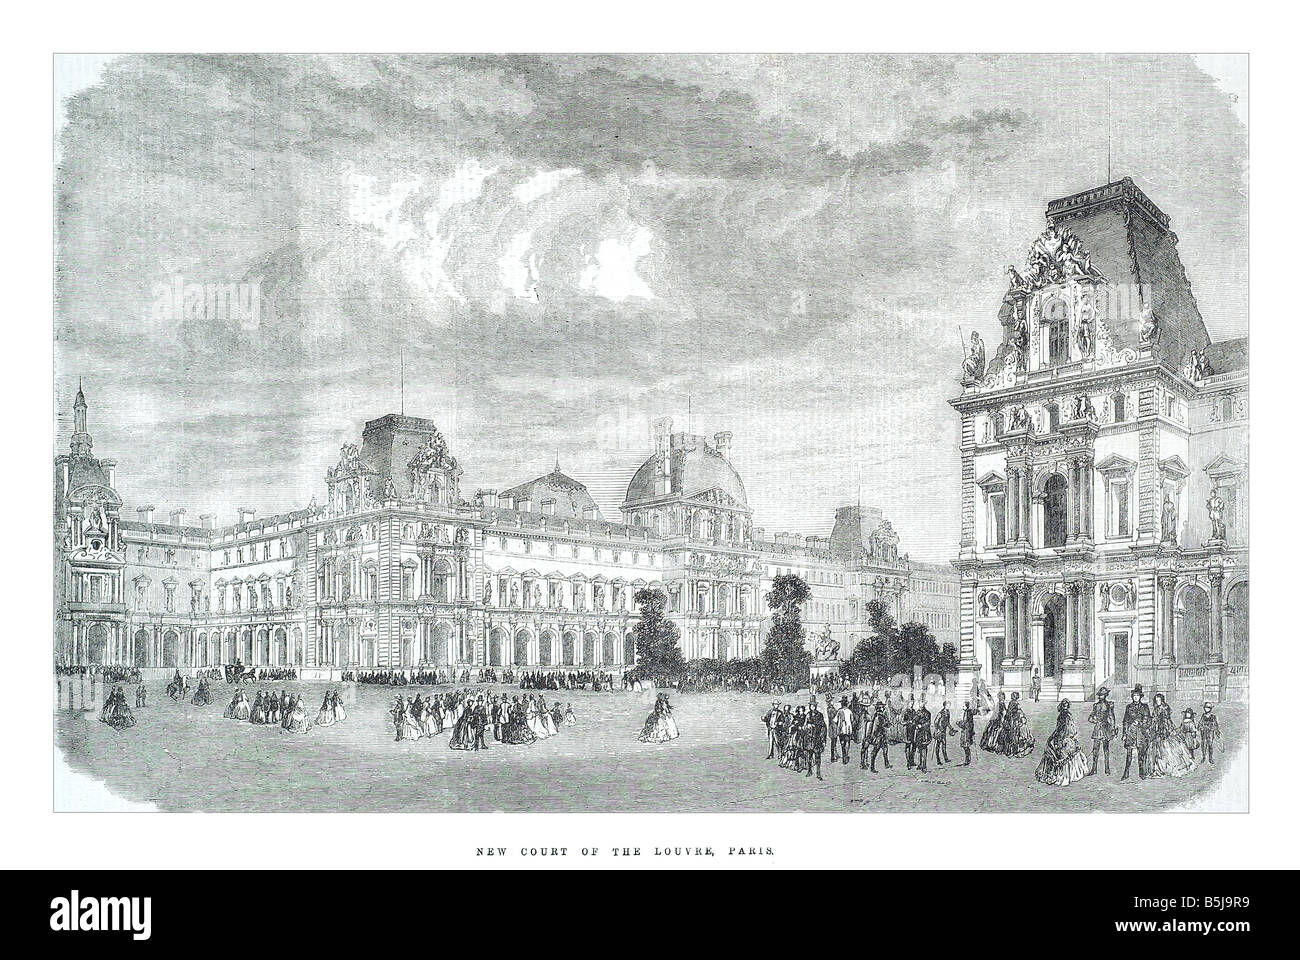 New court of the louvre paris March 8 1856 The Illustrated London News Page 244 Stock Photo